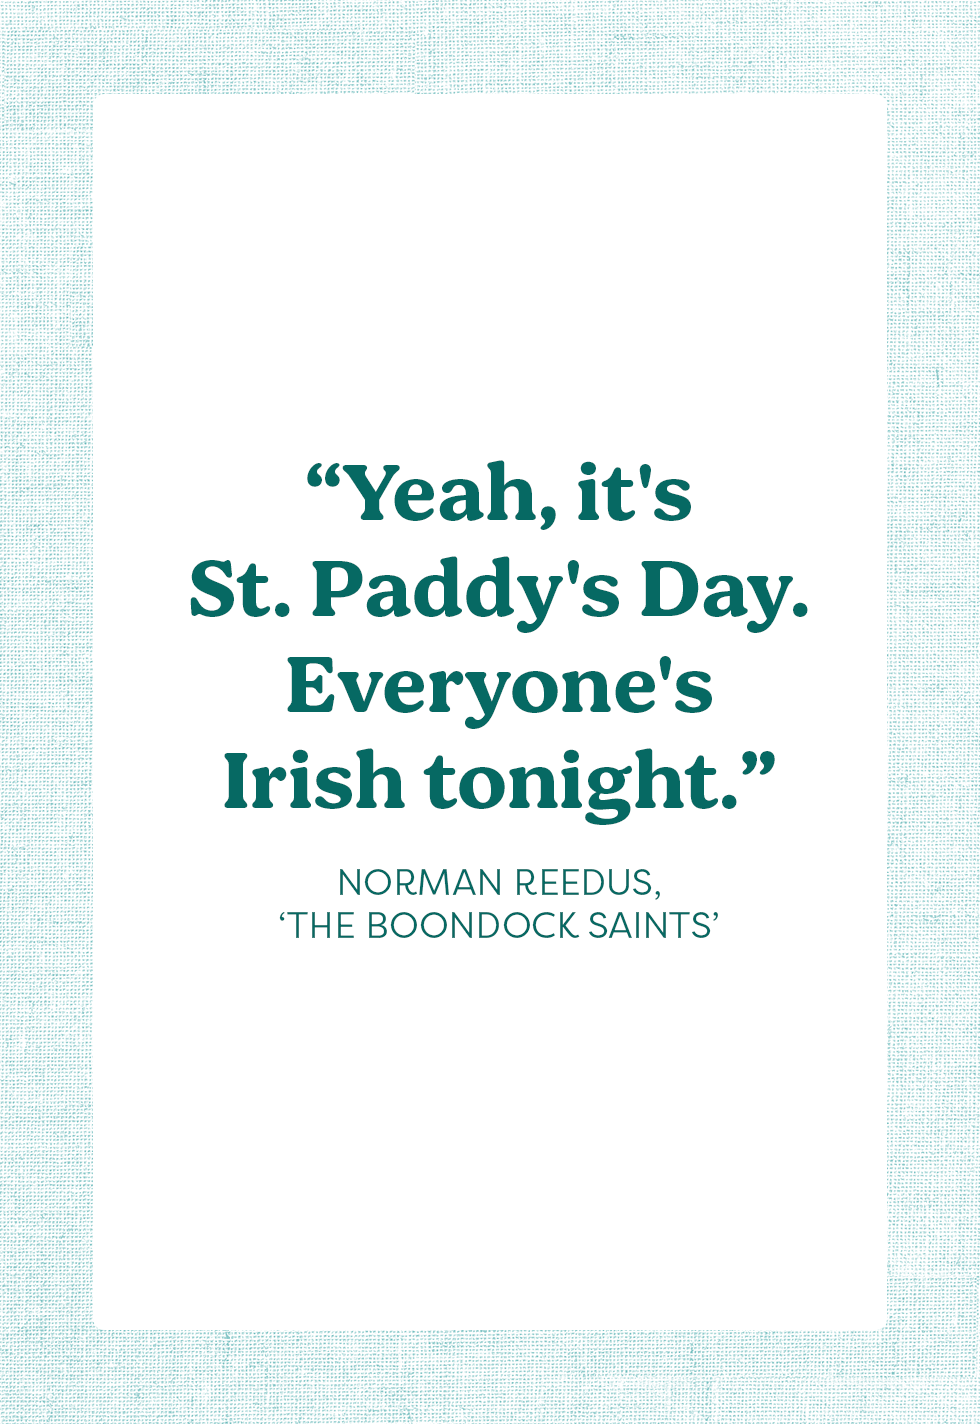 best st patrick's day quotes